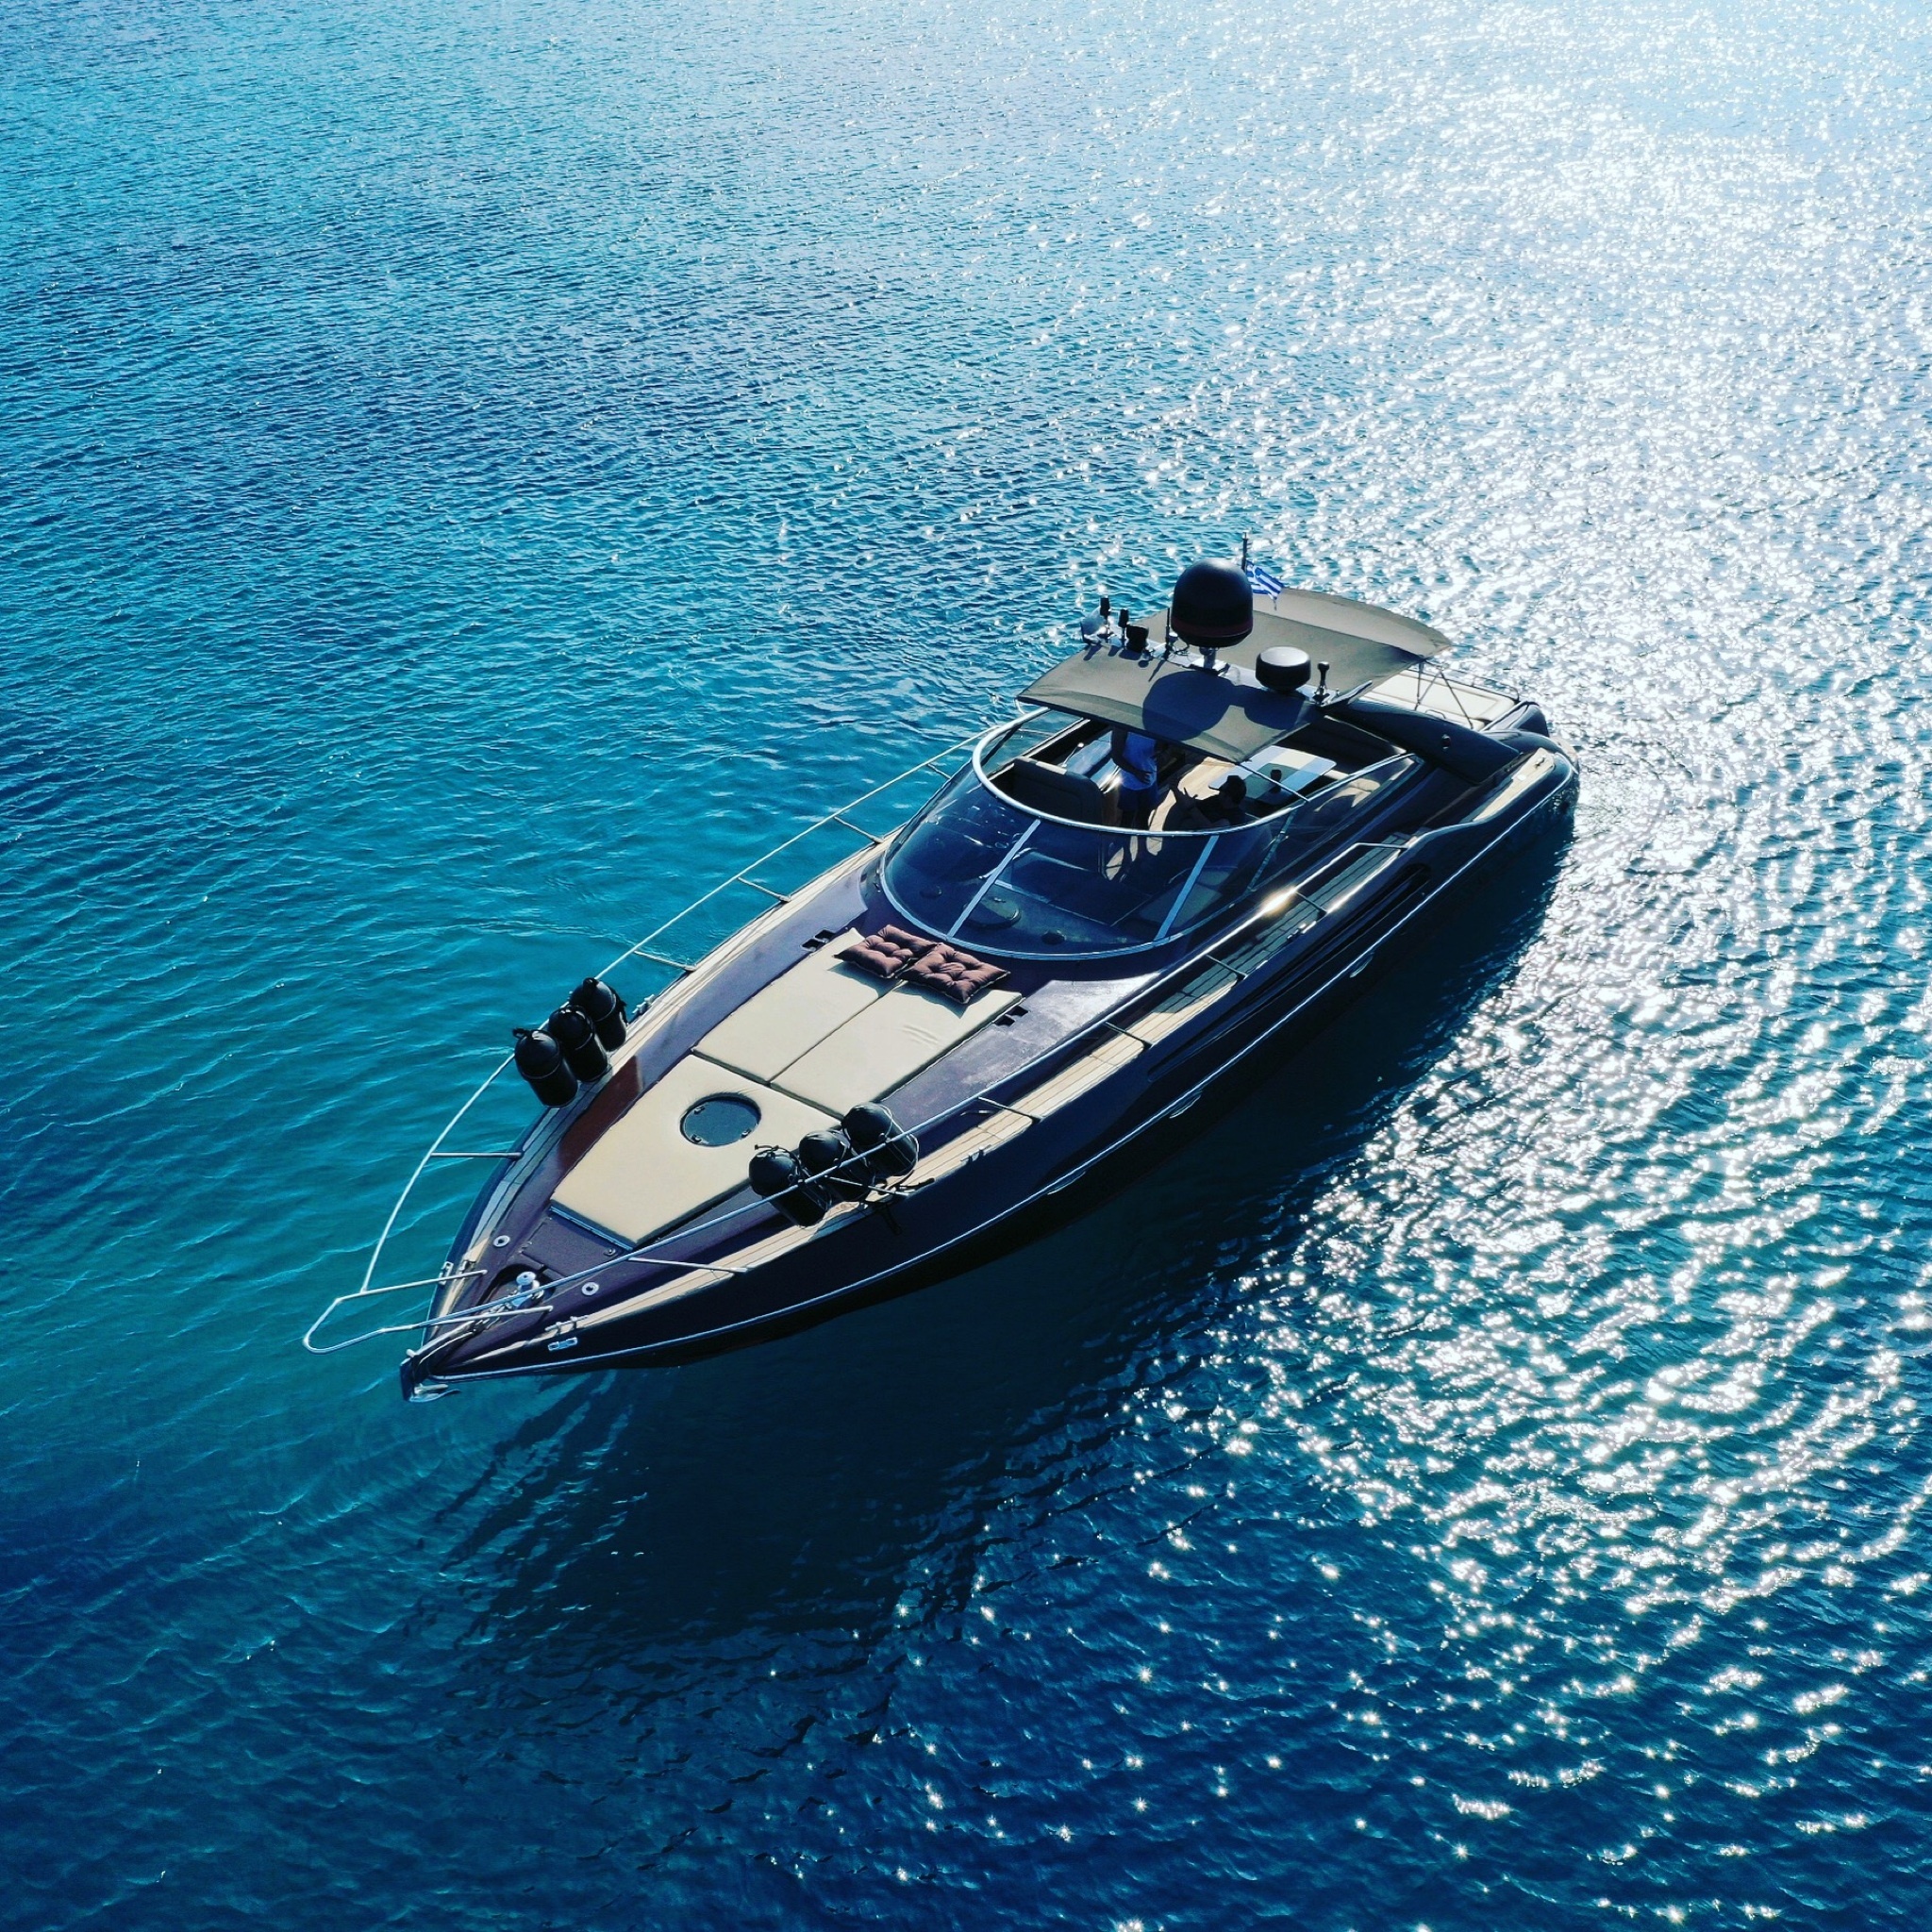 Motorboat: Sunseeker 47, Bow rider, Runabout. 2050x2050 HD Background.